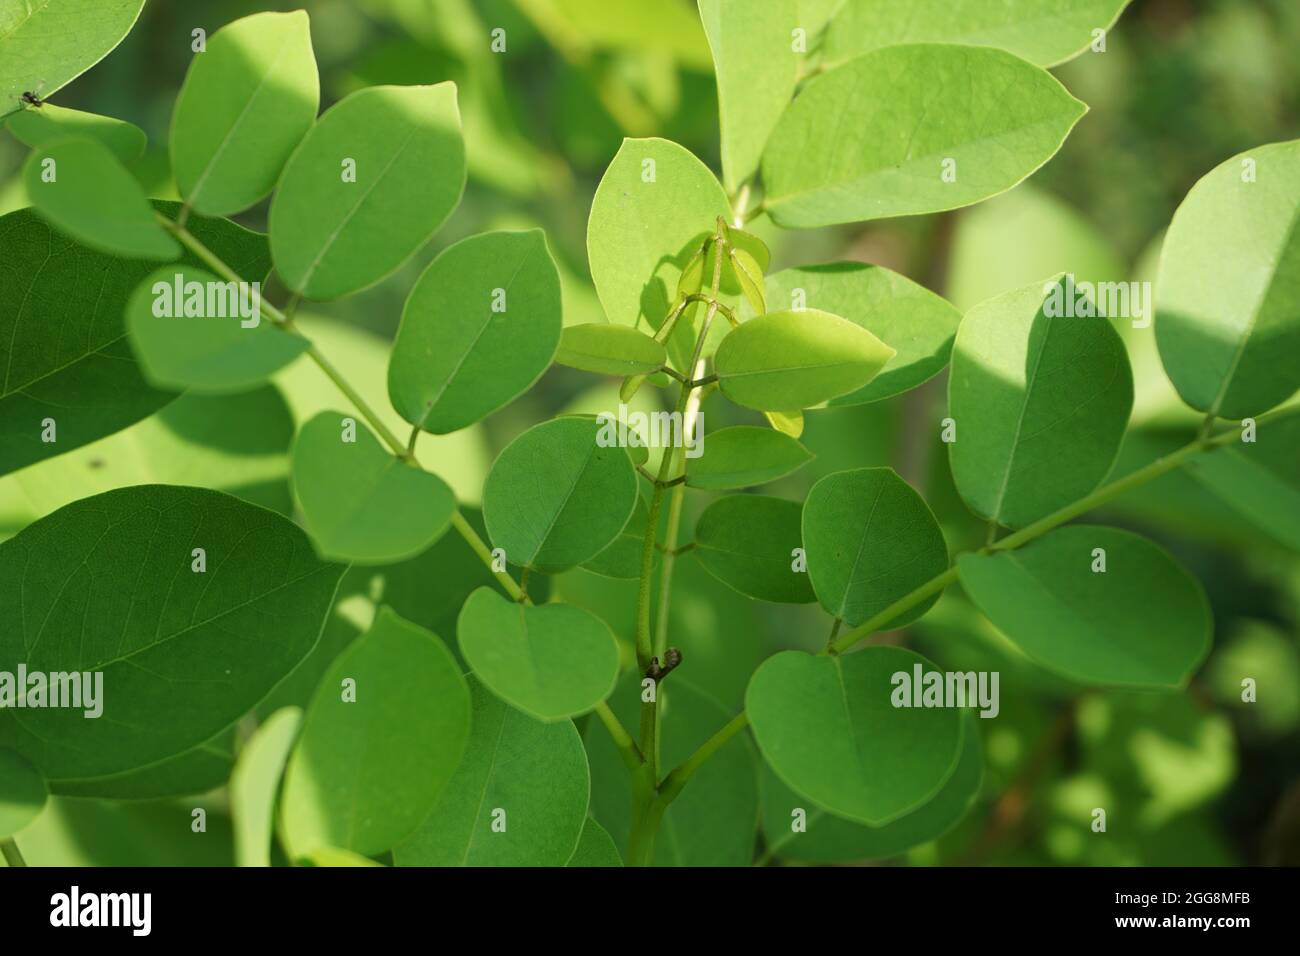 Dalbergia latifolia (also known as sonokeling, sanakeling, rosewood) with a natural background. Stock Photo